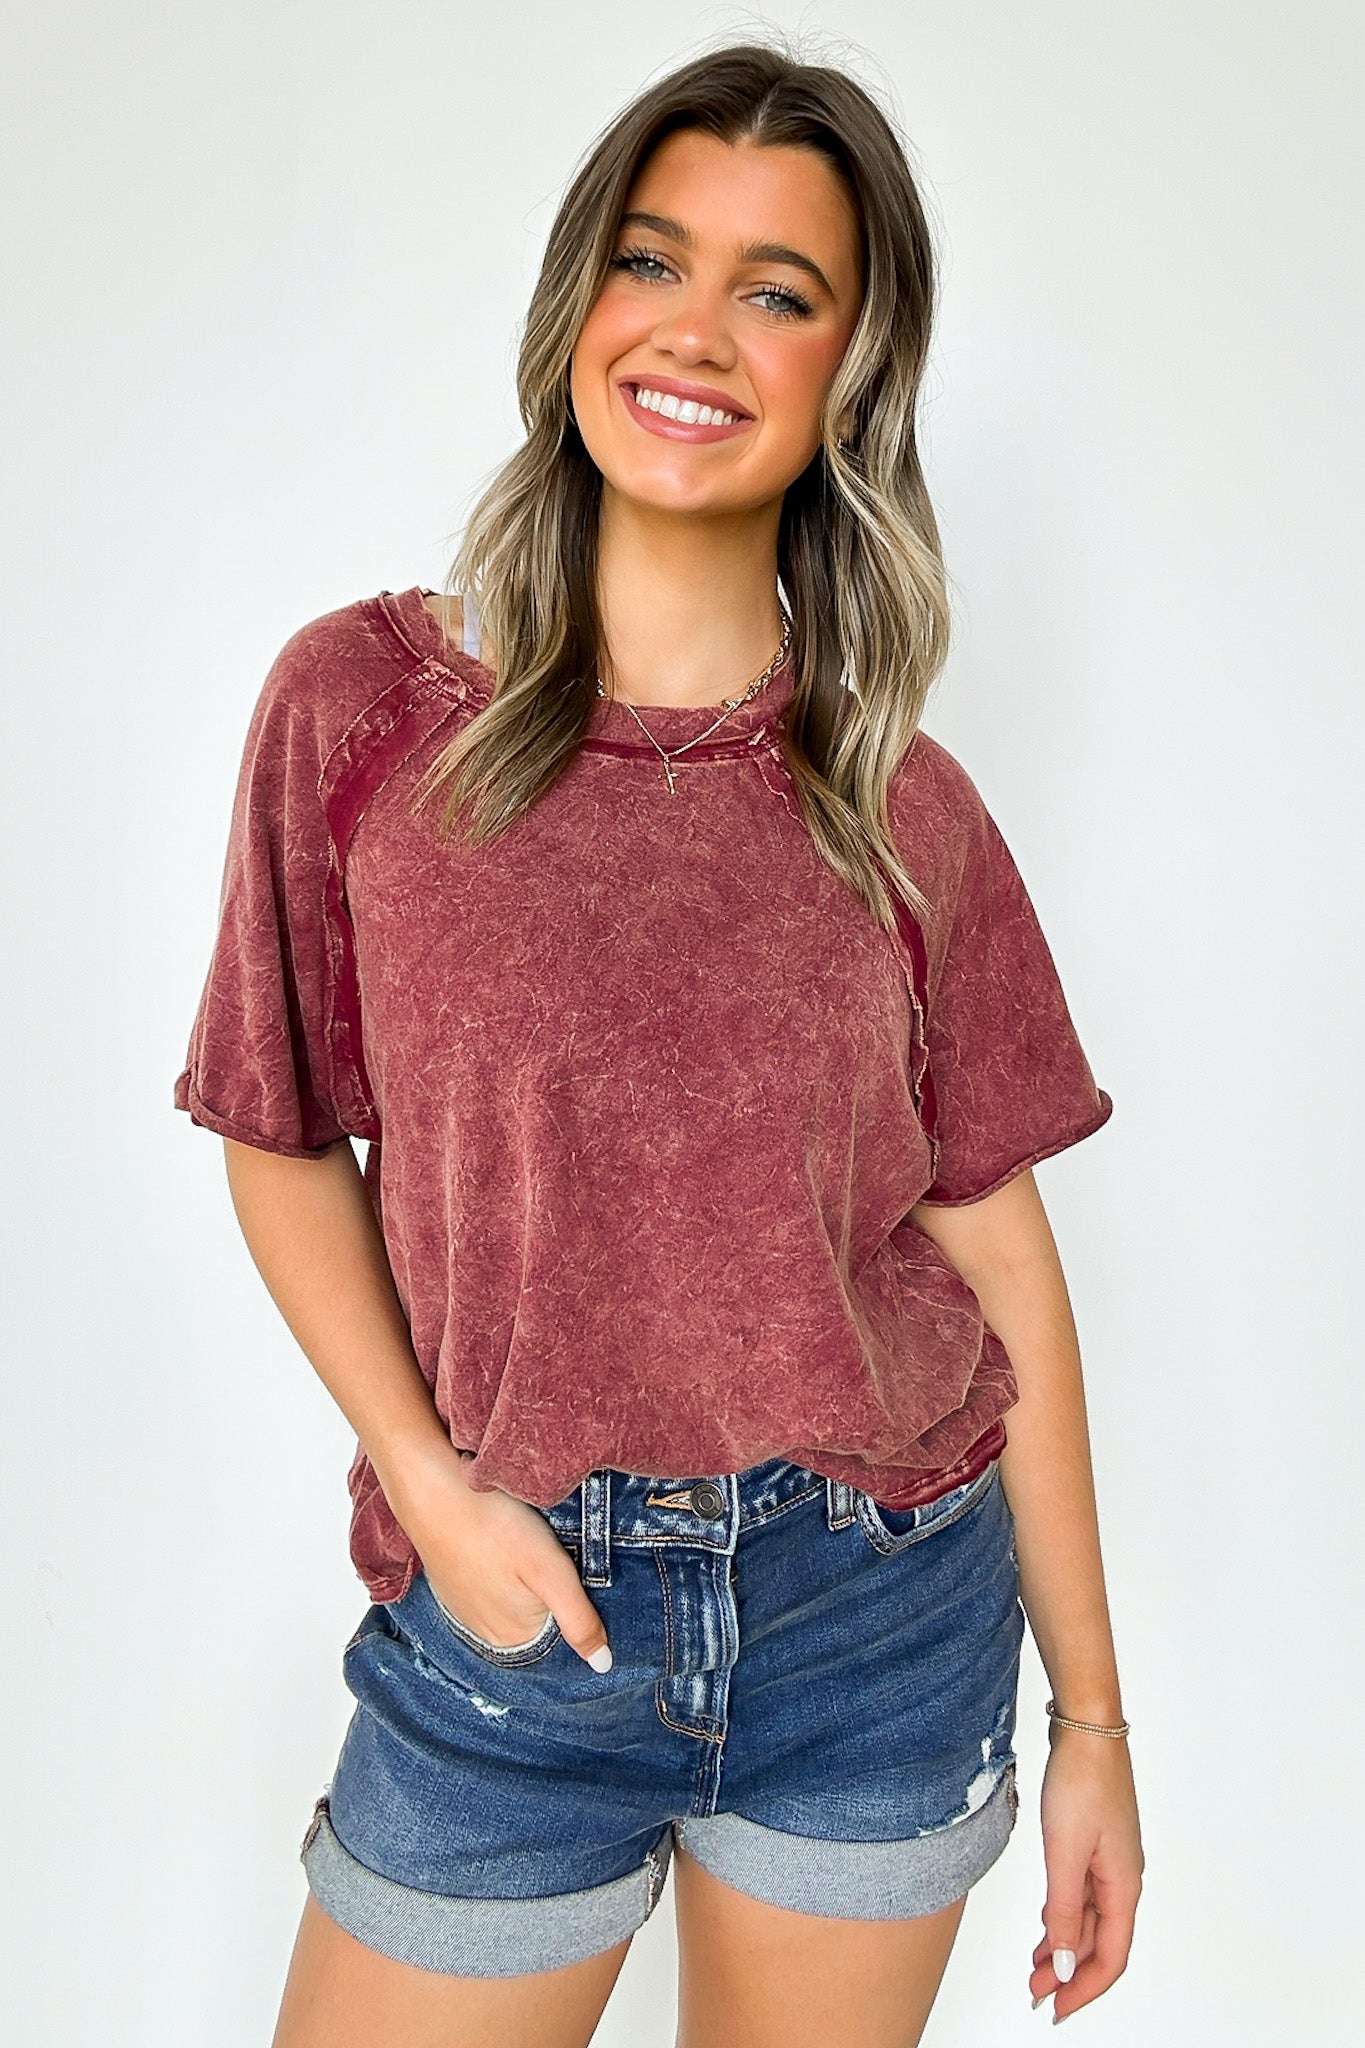 Cabernet / S Carowyn Mineral Wash Relaxed Fit Top - Madison and Mallory